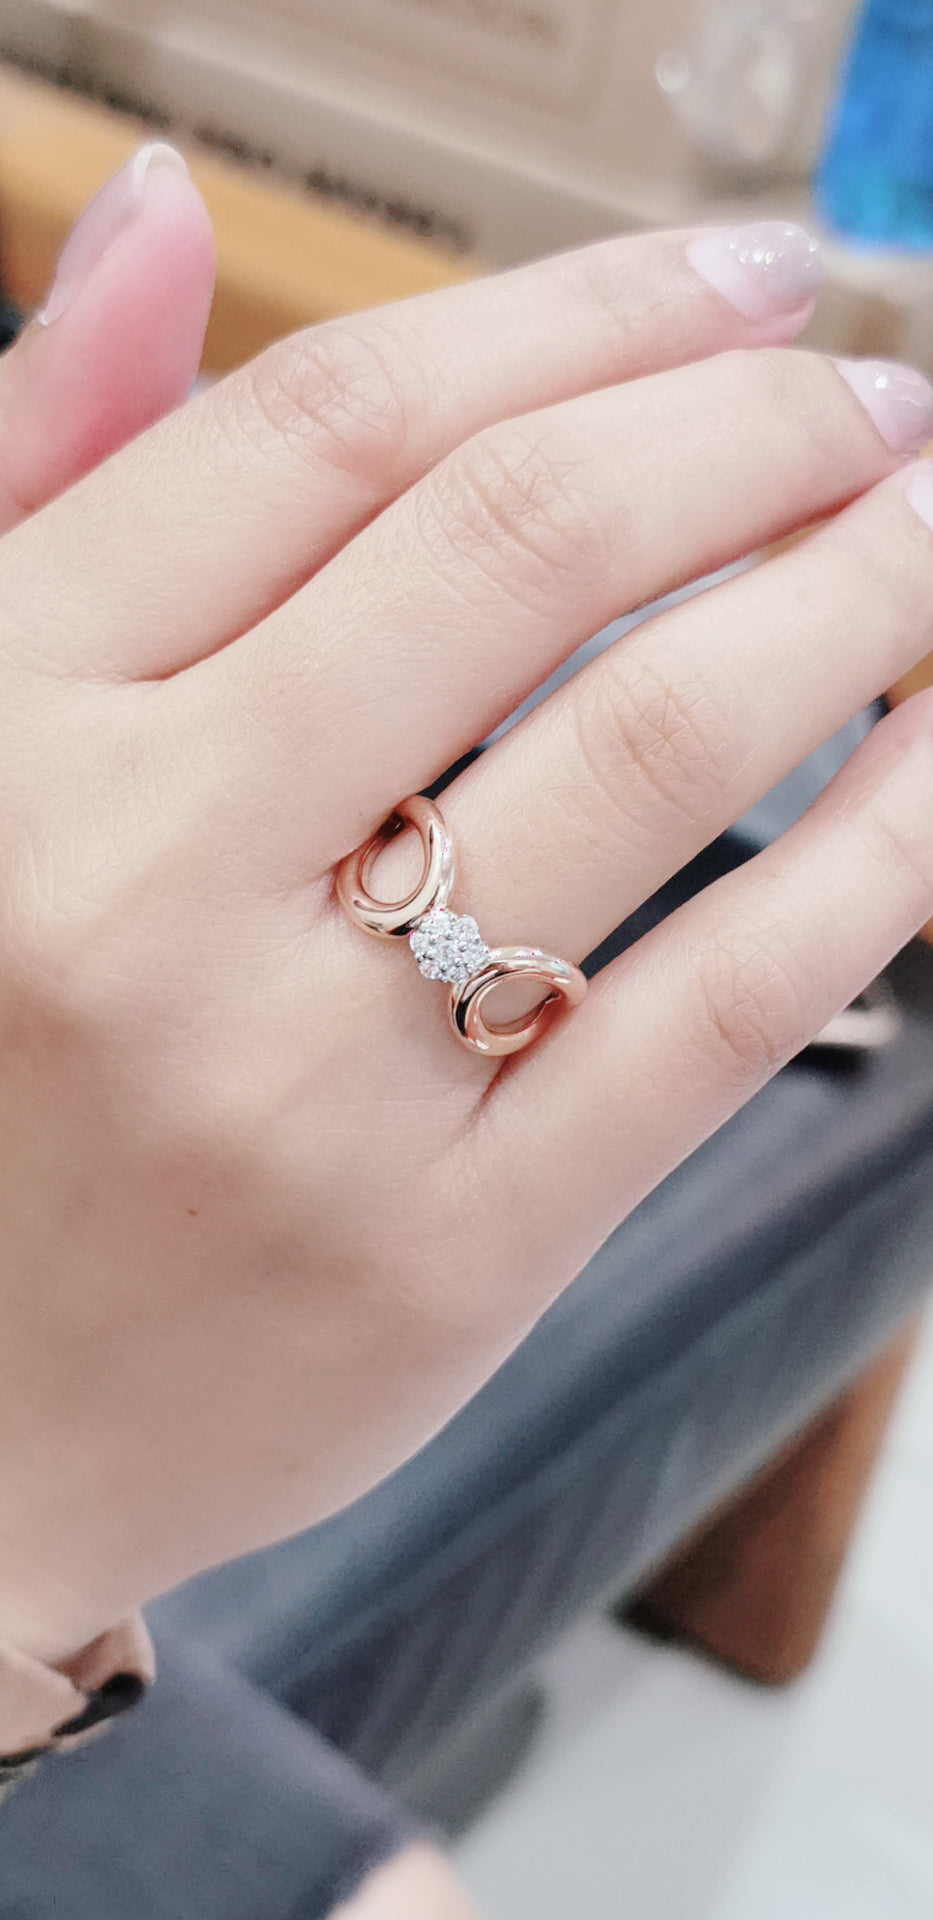 Cluster Set Diamond Ring With A Designer Rounded Wide Band In 18k Rose Gold.